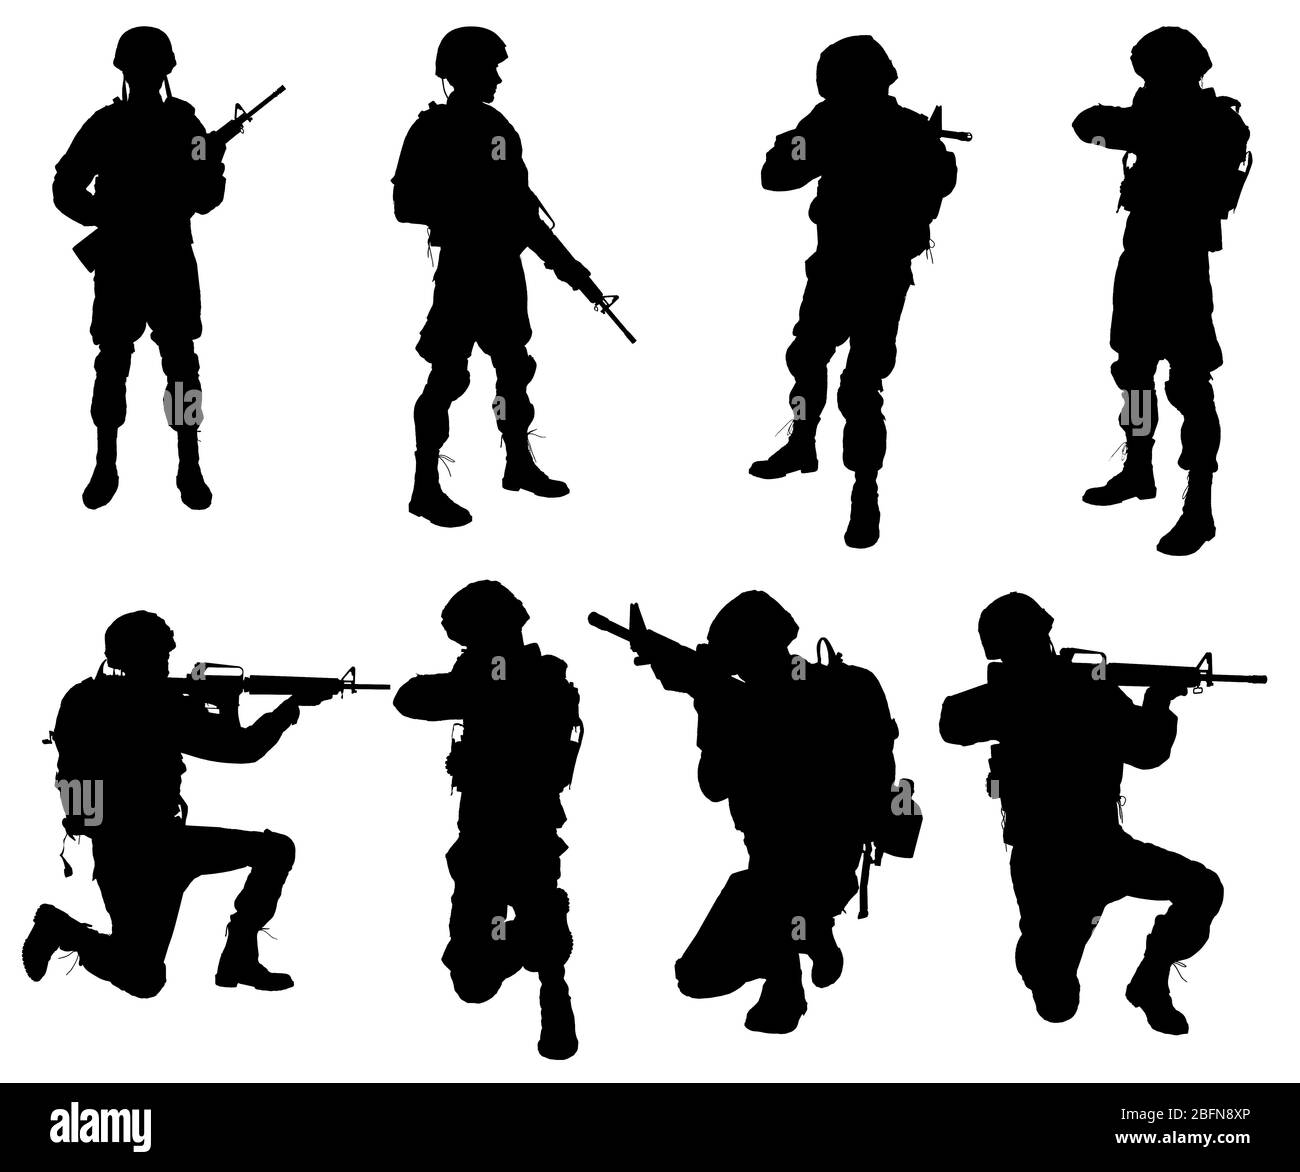 Silhouettes of soldiers on white background. Military service concept. Stock Photo